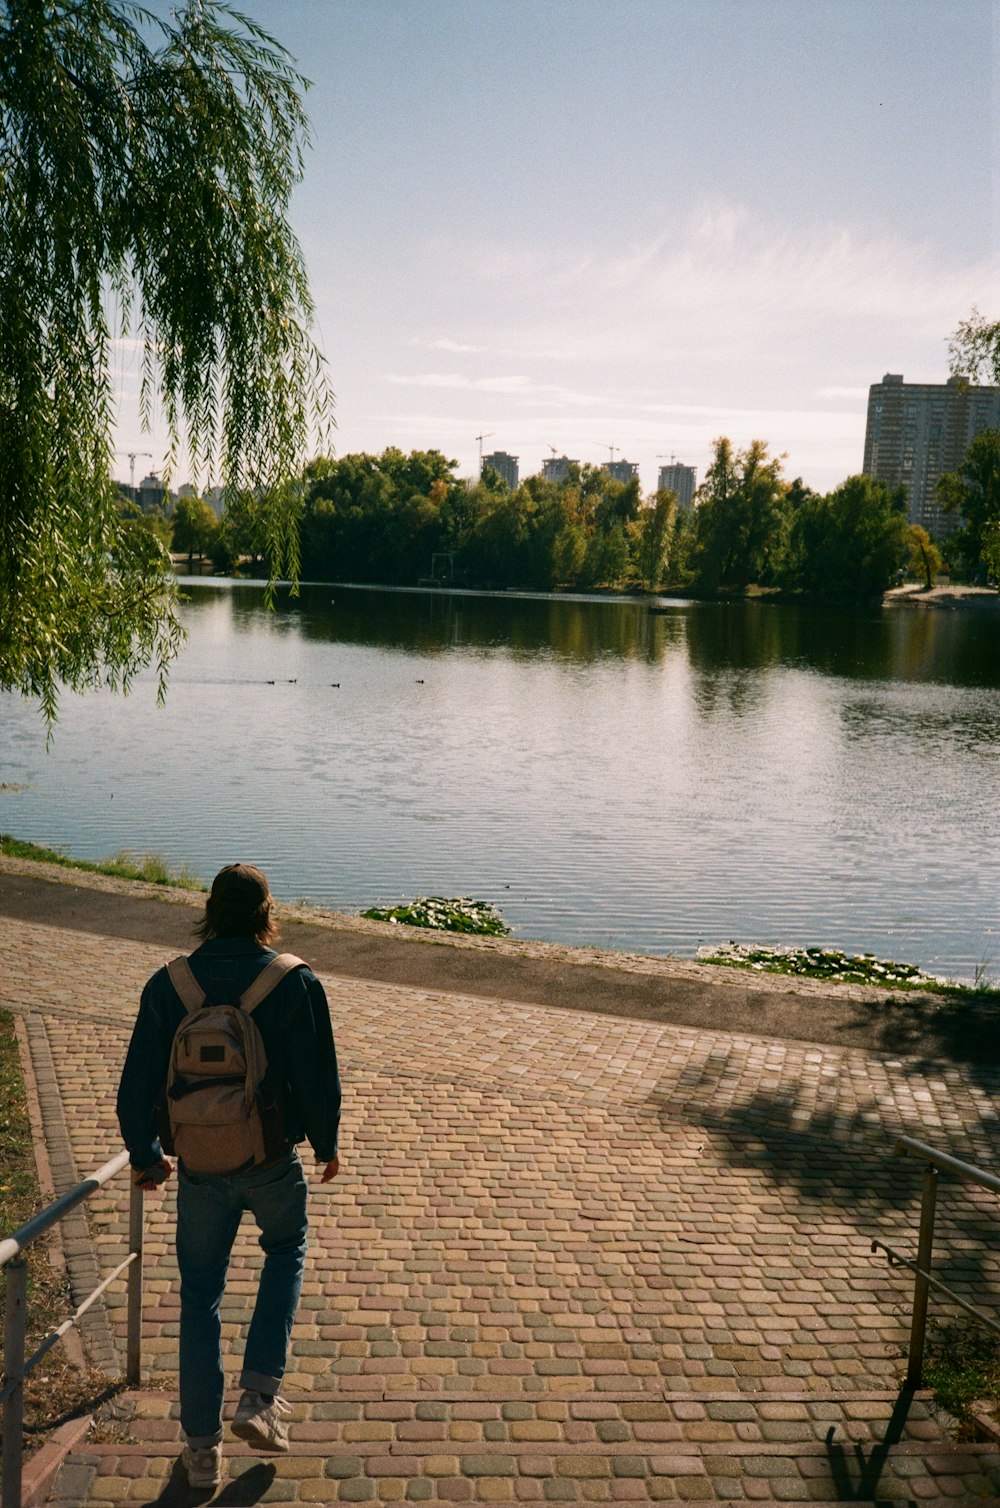 a person with a backpack walking up a brick path